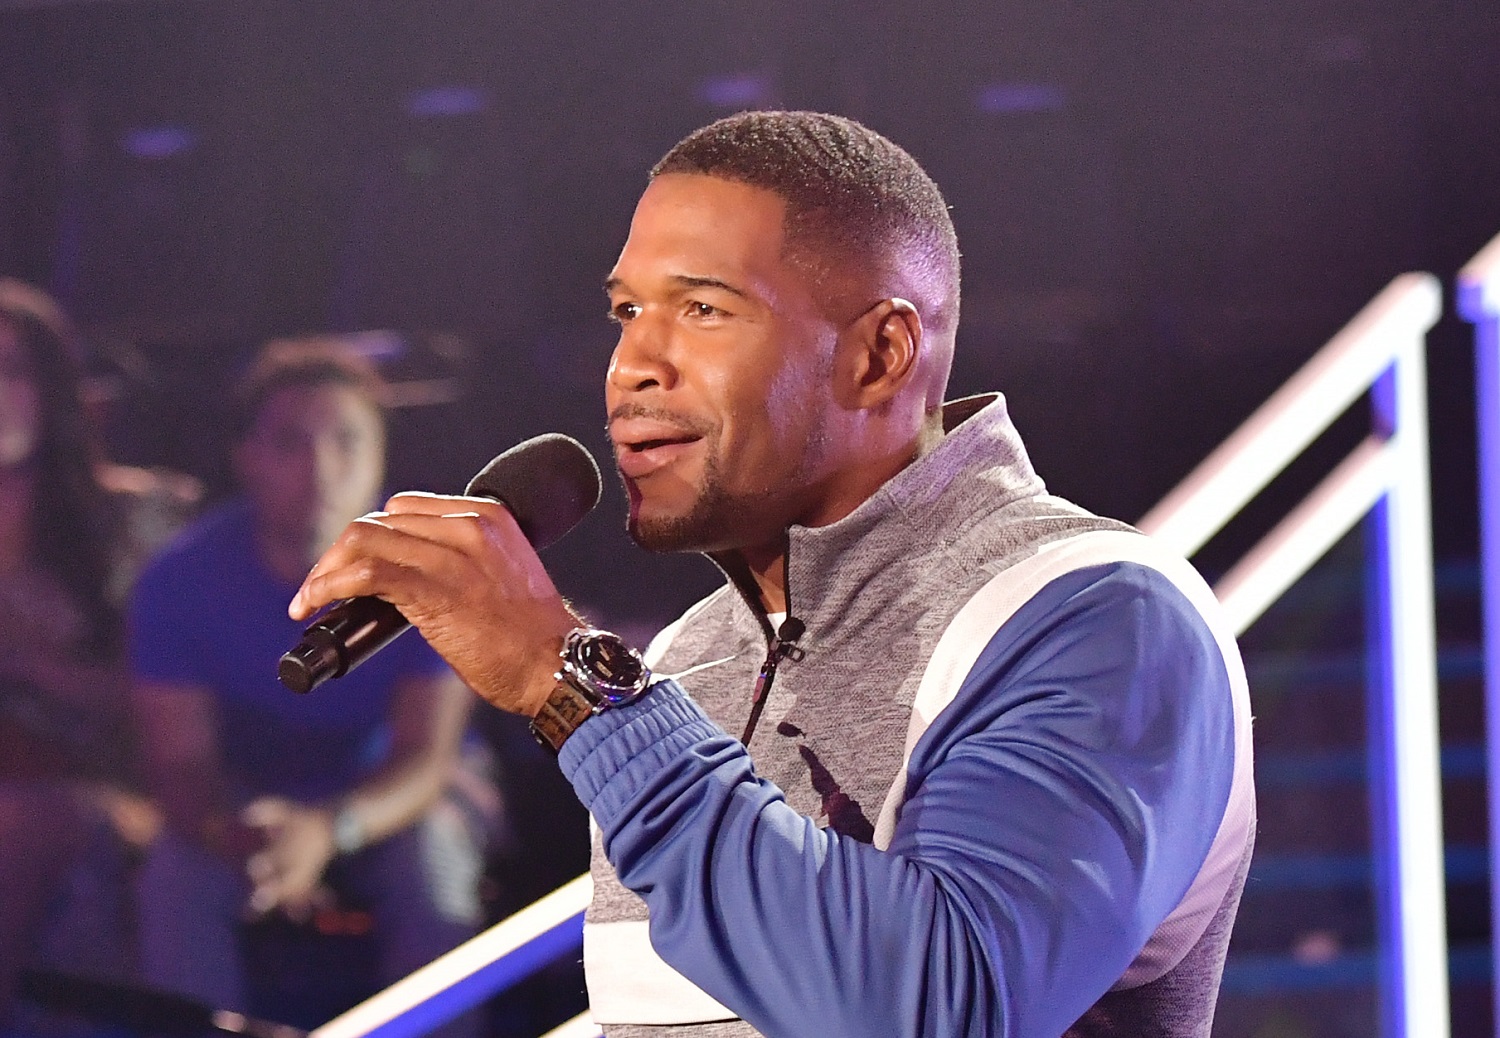 Michael Strahan, already inducted into the Pro Football Hall of Fame, is getting his star on the Hollywood Walk of Fame. | Emma McIntyre/KCASports2019/Getty Images for Nickelodeon